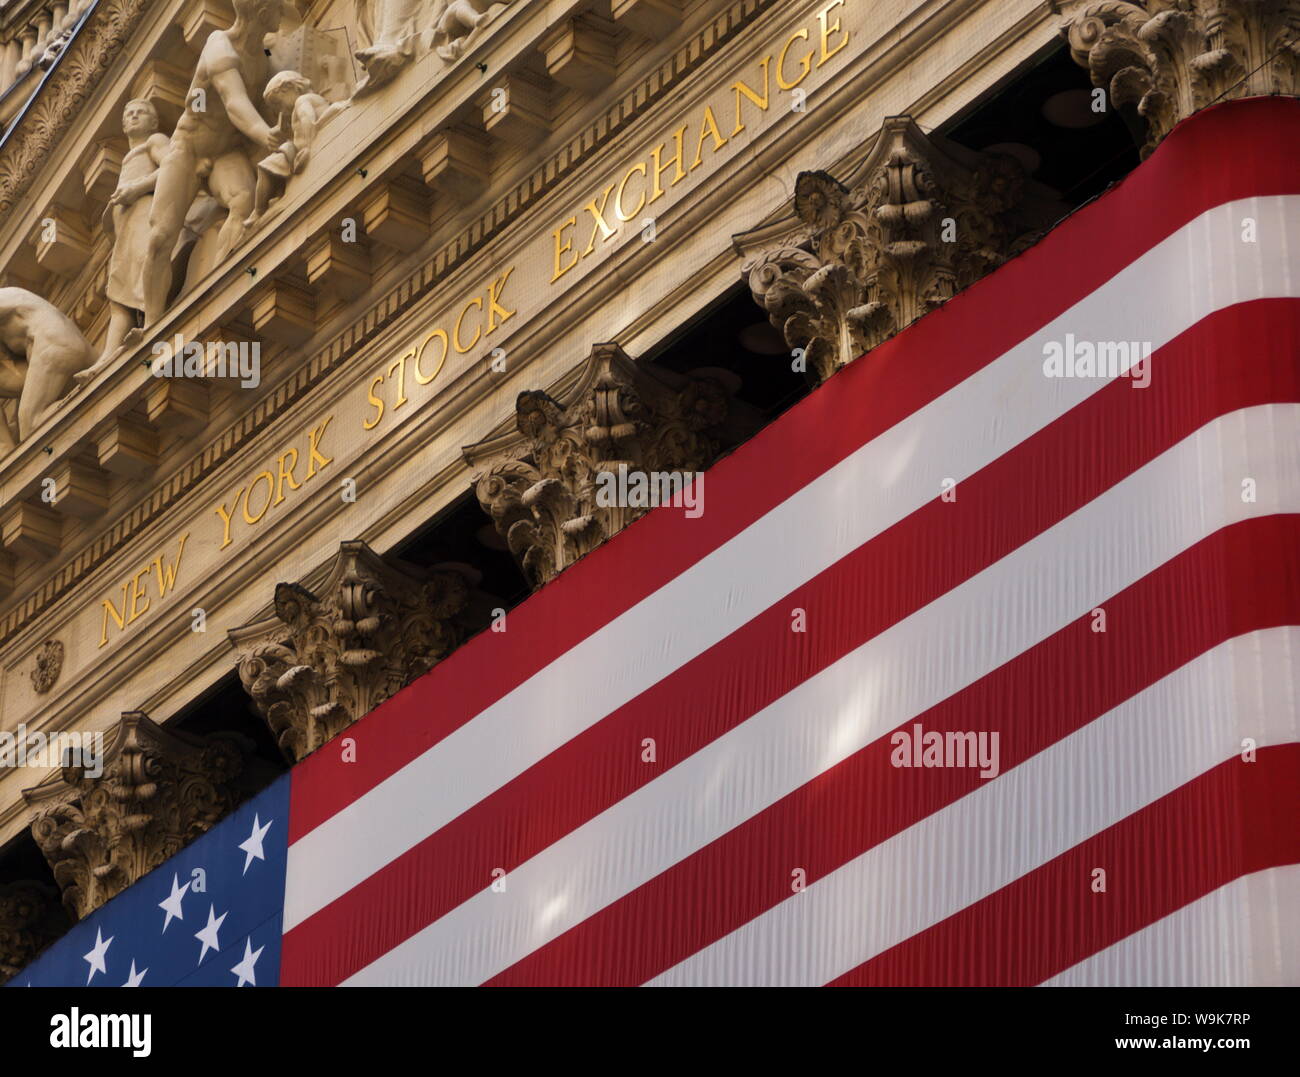 New York Stock Exchange and American flag, Wall Street, Financial District, New York City, New York, United States of America, North America Stock Photo